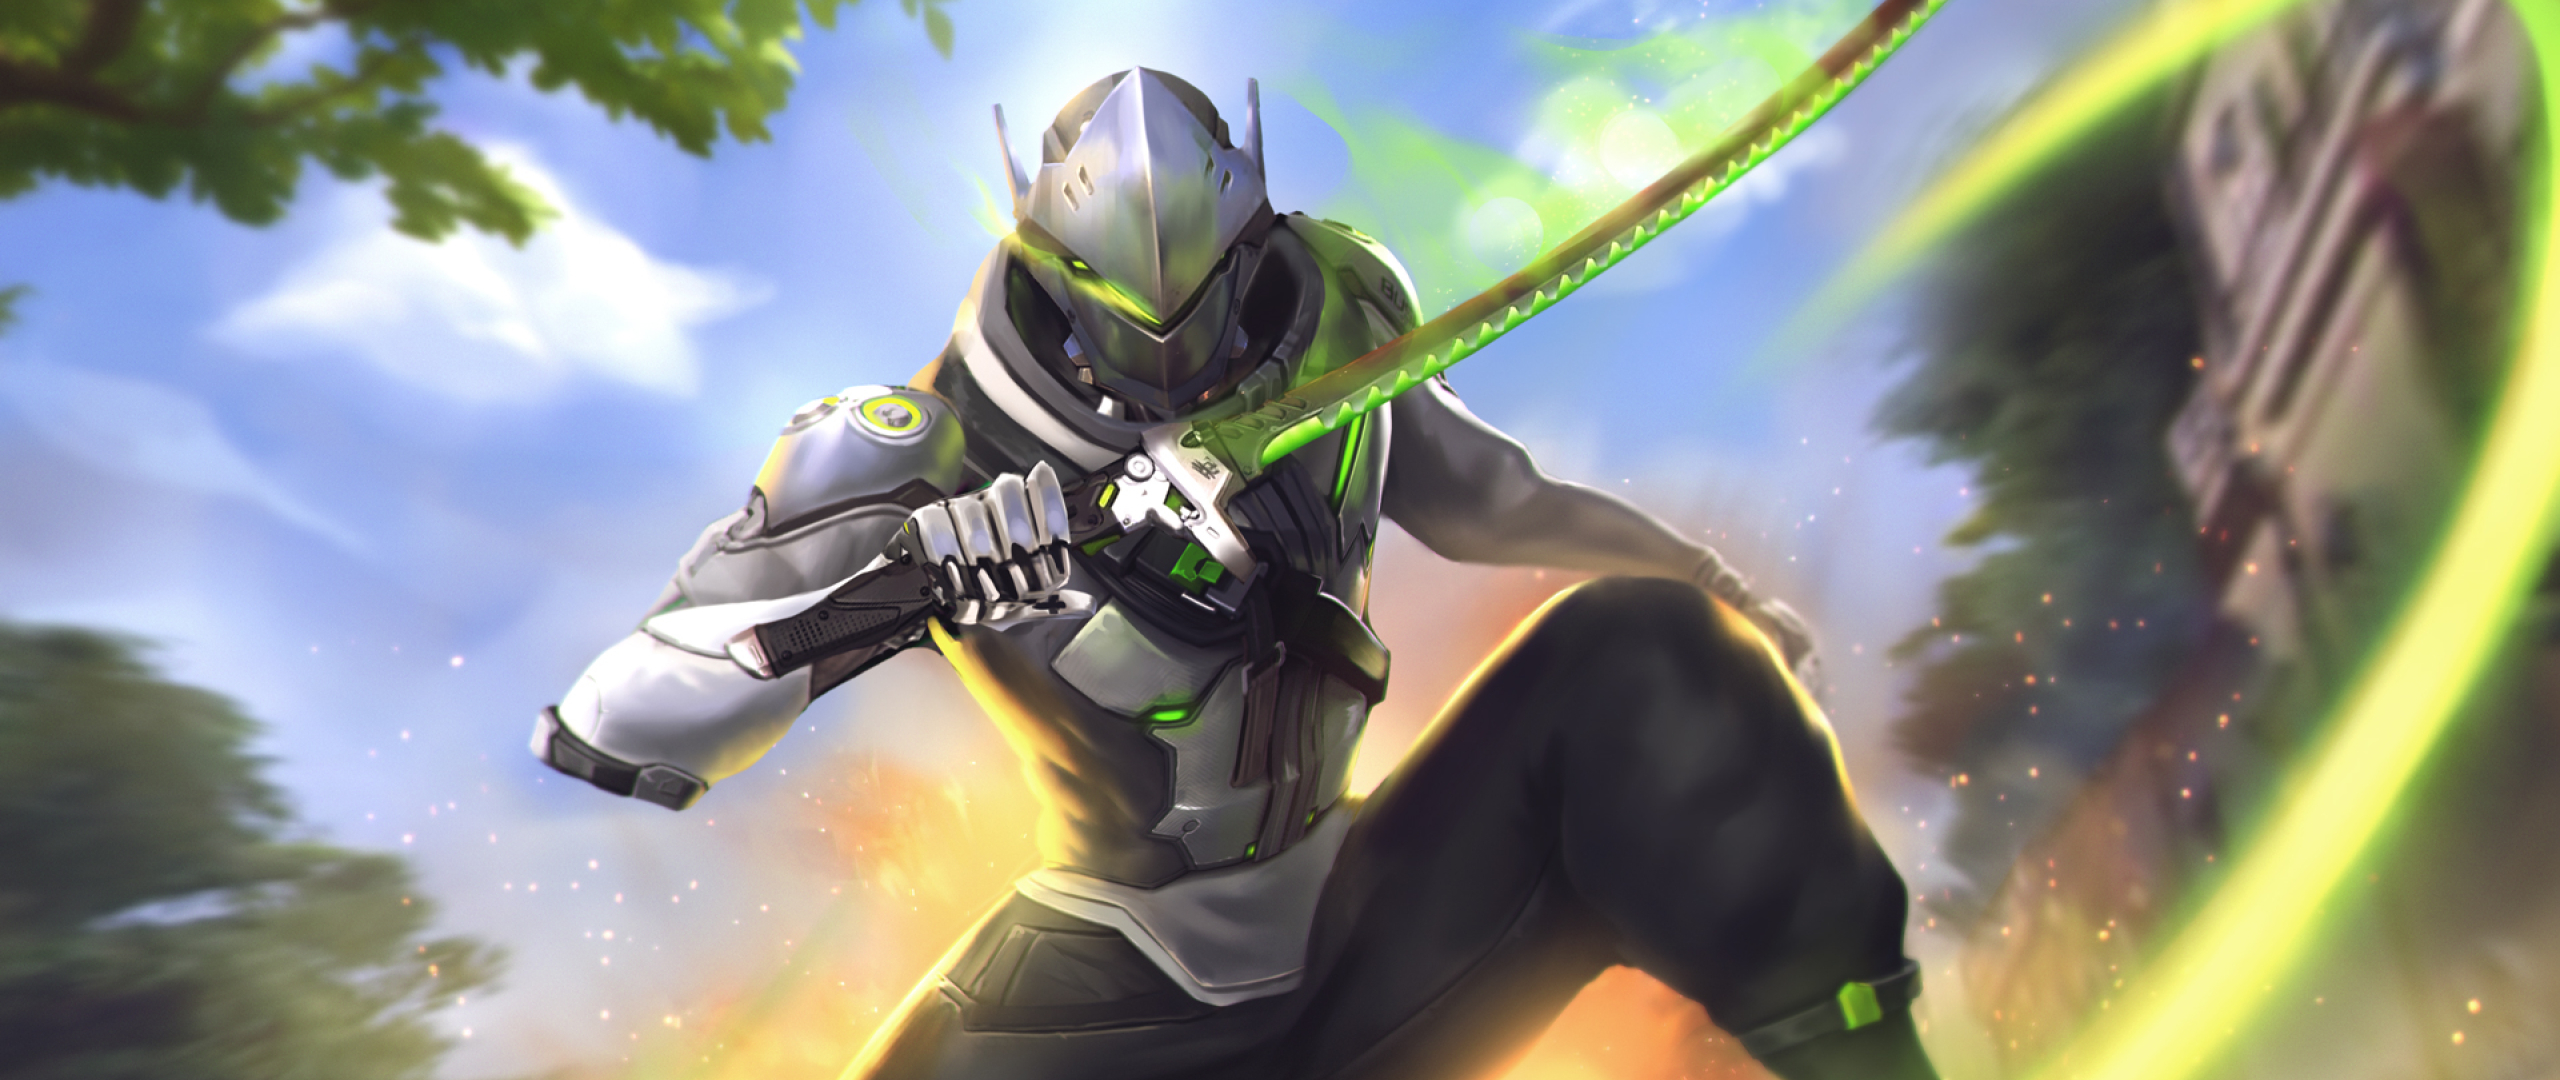 2560x1080 Overwatch Genji 2560x1080 Resolution Wallpaper Hd Games 4k Wallpapers Images Photos And Background Wallpapers Den